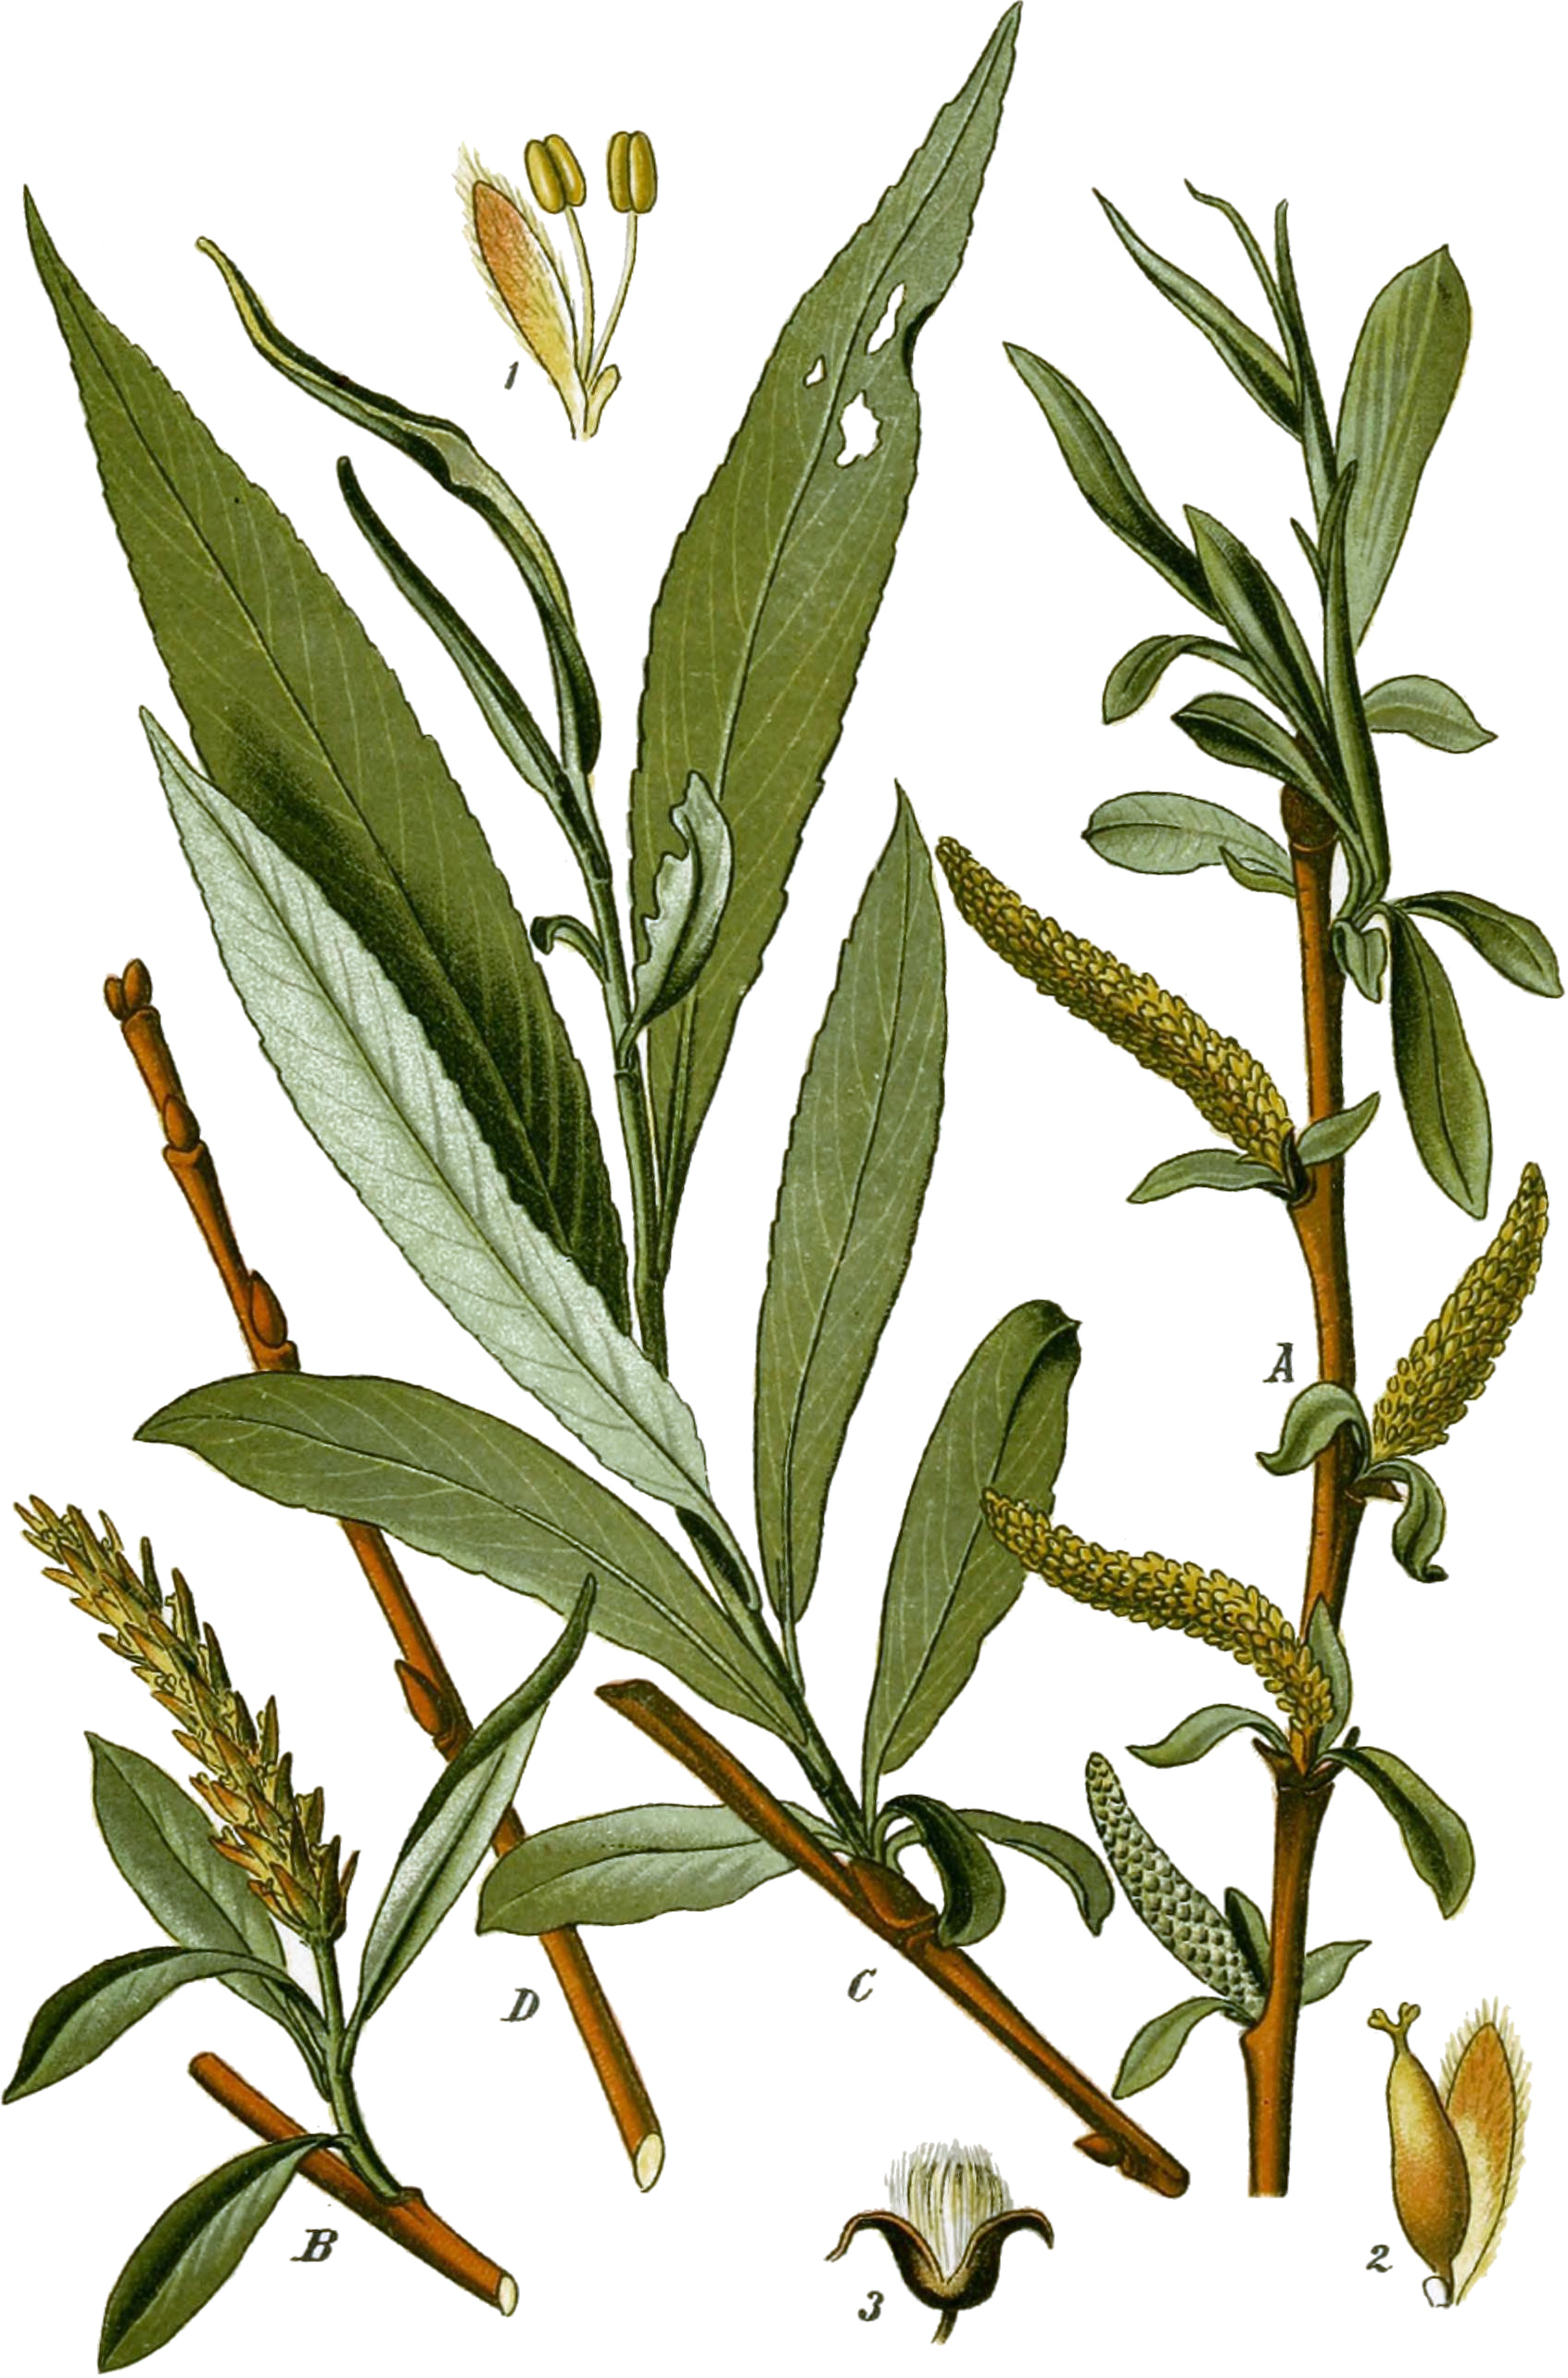 Salix_alba_as_S._vitellina_Thome_1904,_2nd_ed.,_vol_2,_plate_159,_cropped,_clean,_no_caption